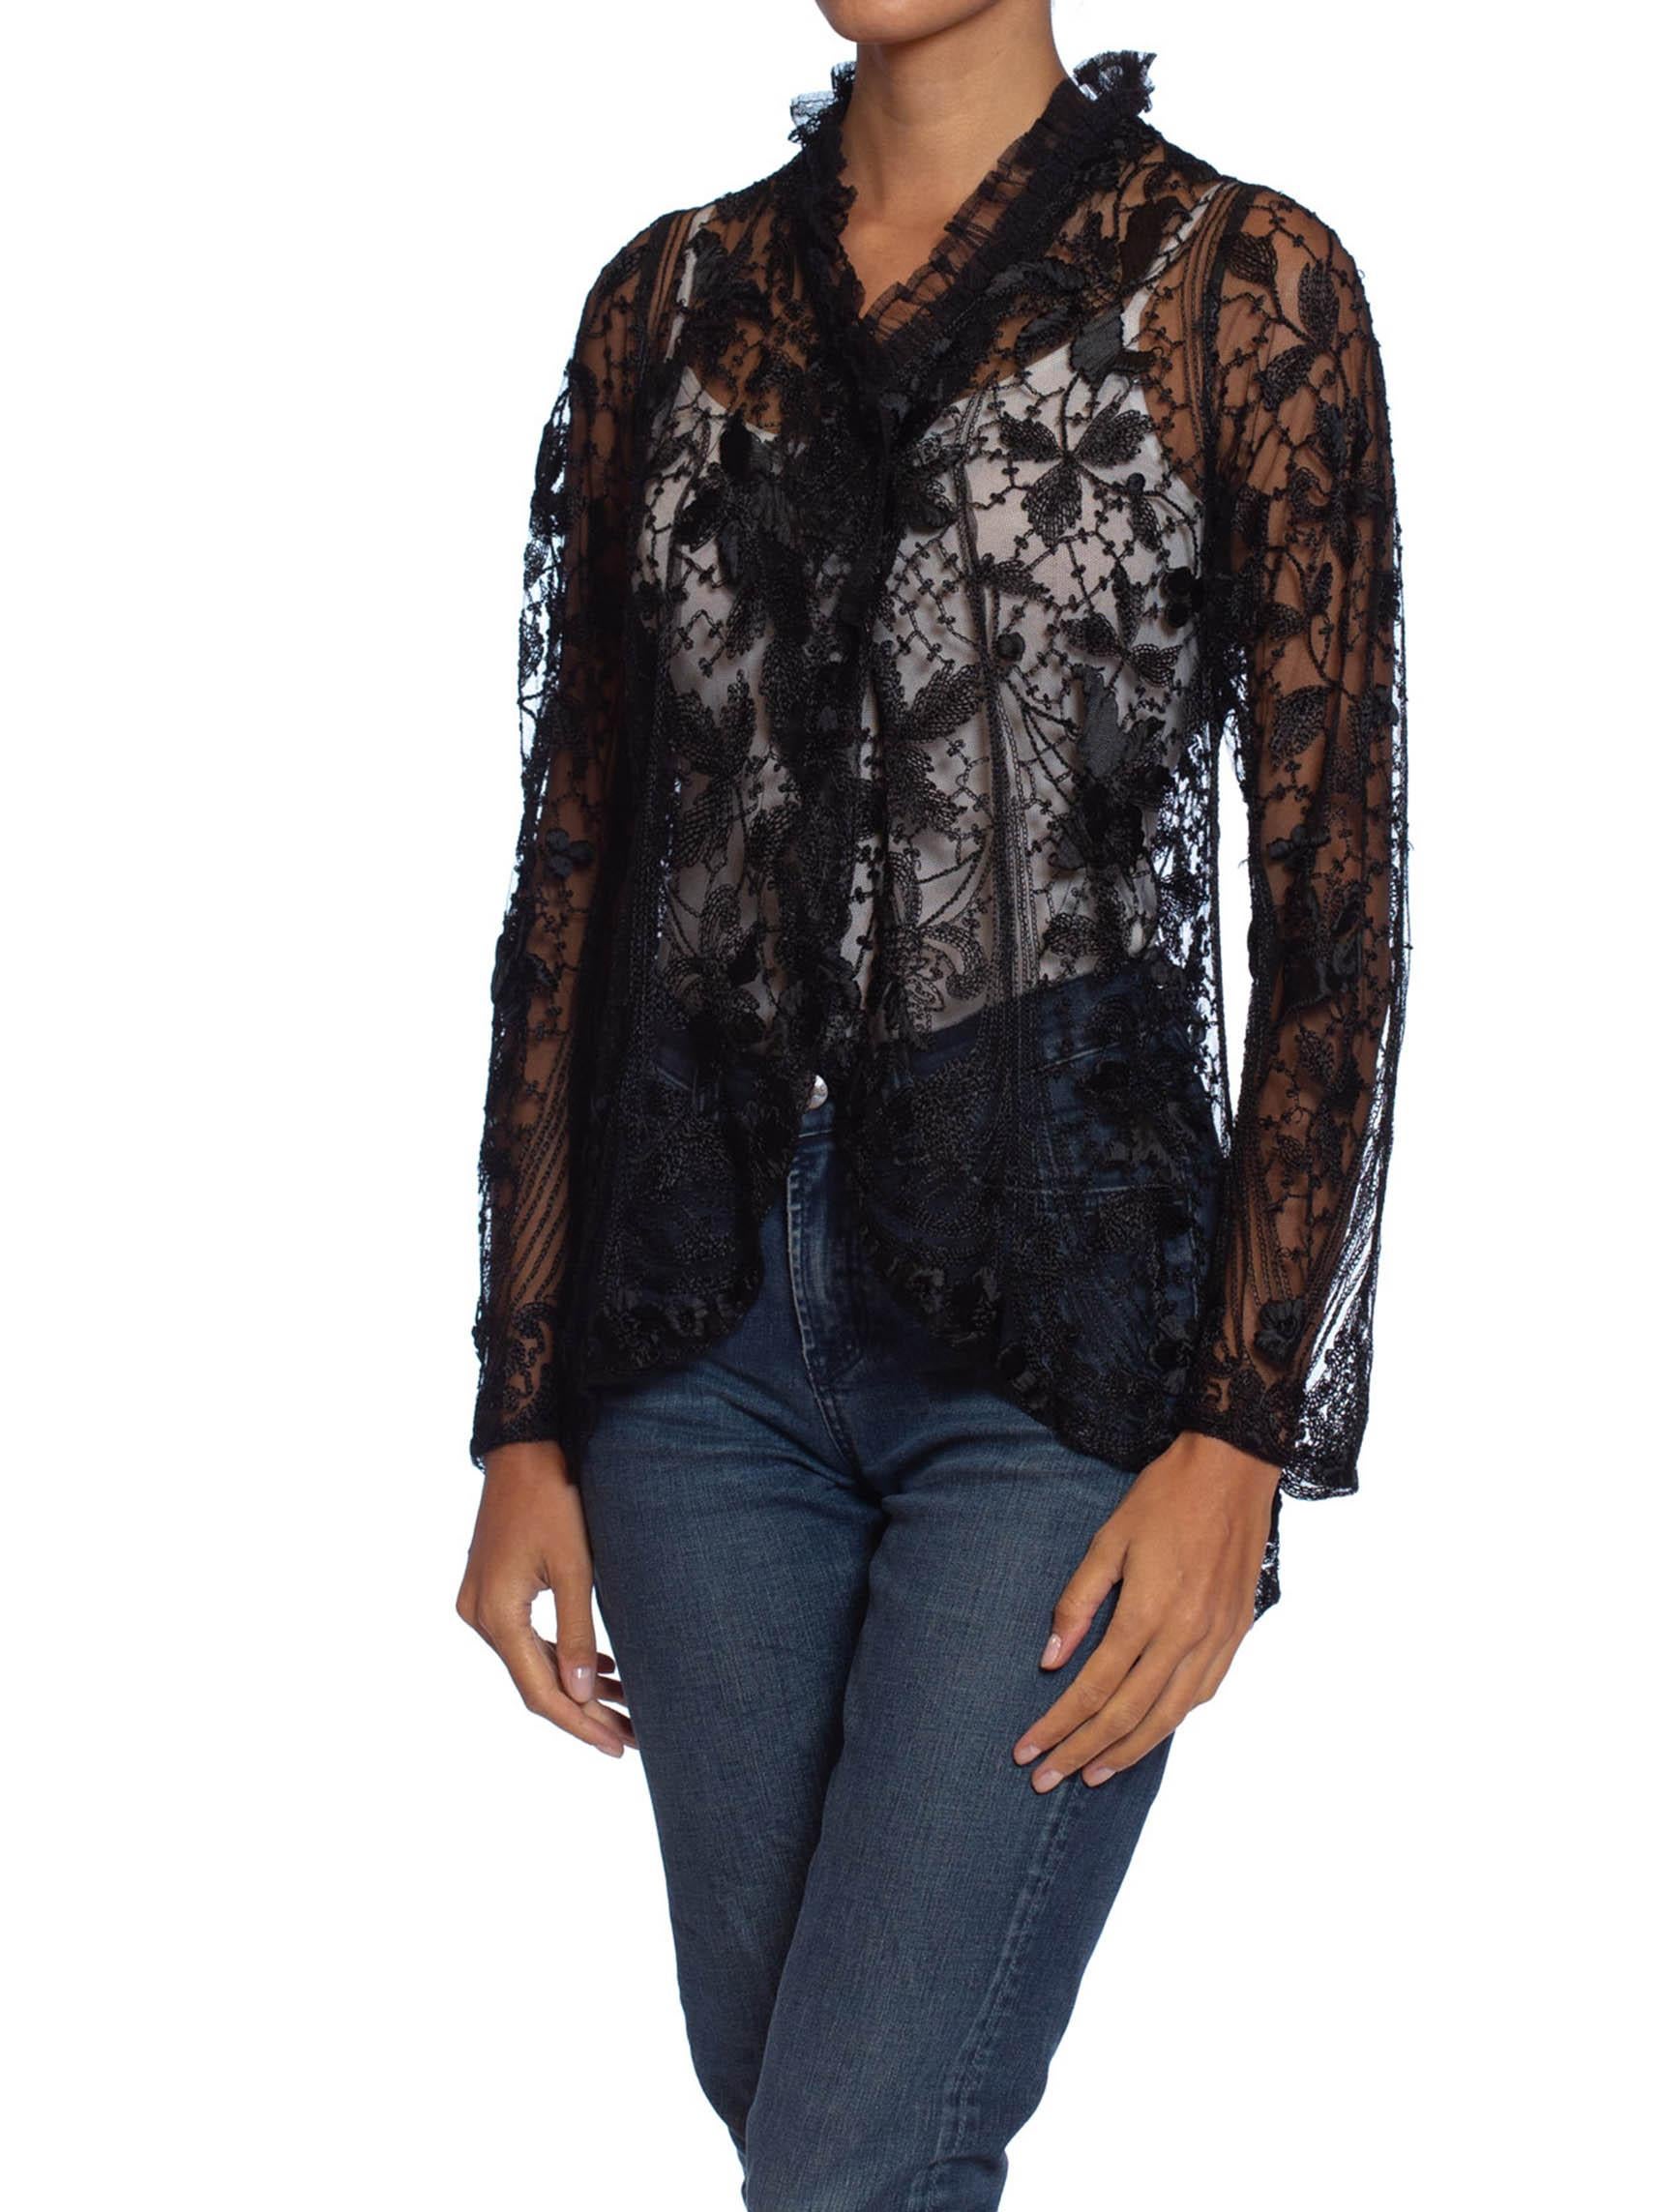 Edwardian Black Silk Embroidered Cotton Net Jacket With Lace Ruffled Collar 1